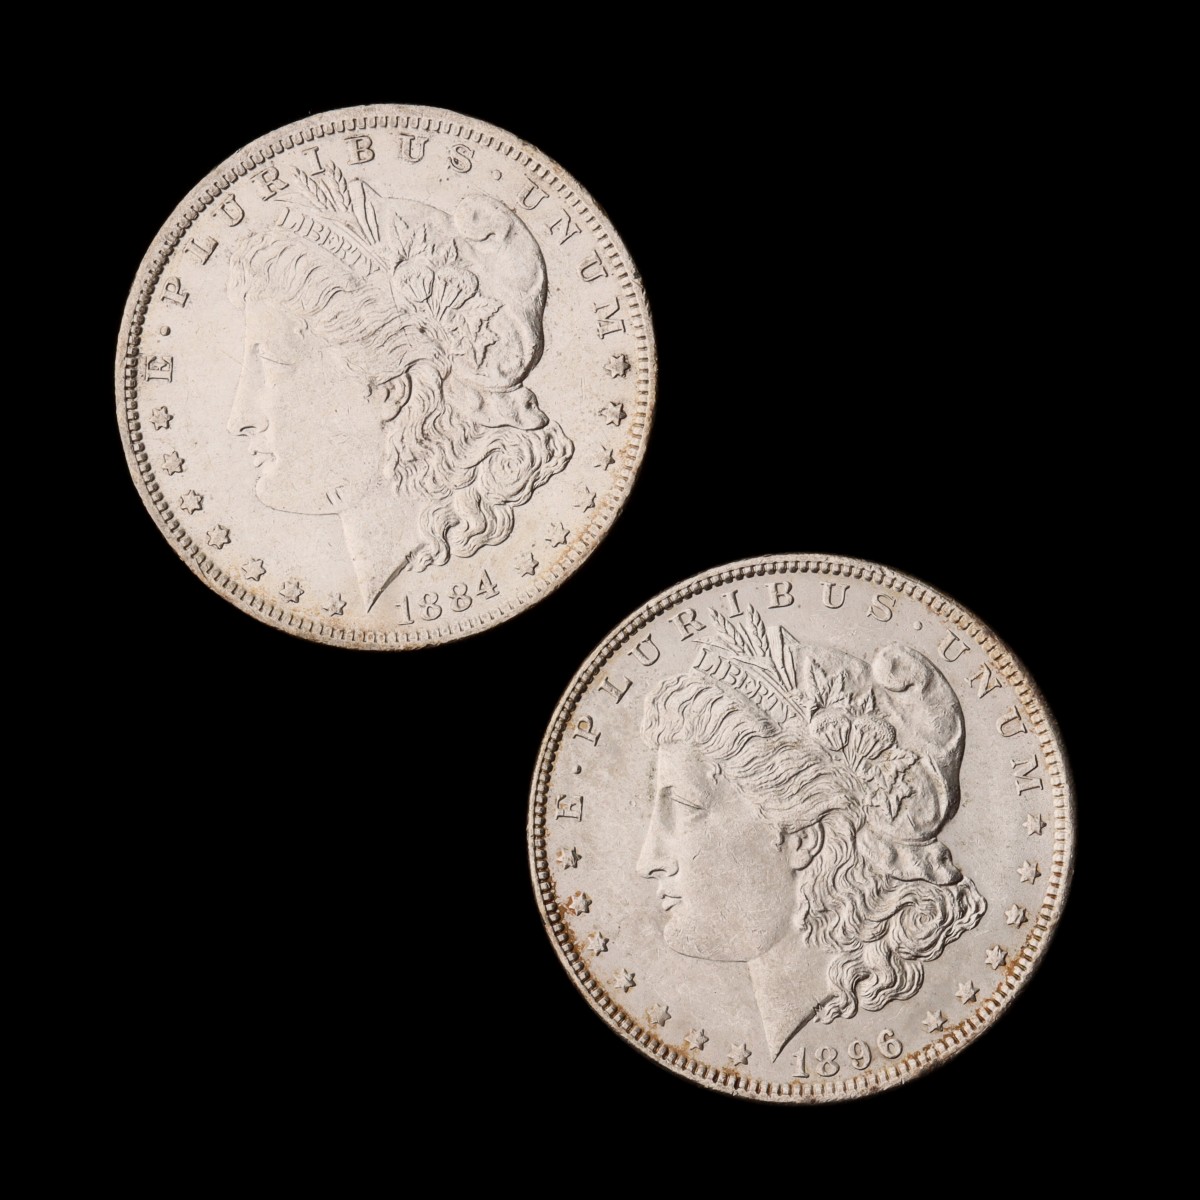 TWO HIGHER GRADE MORGAN SILVER DOLLARS, 1884-O AND 1896